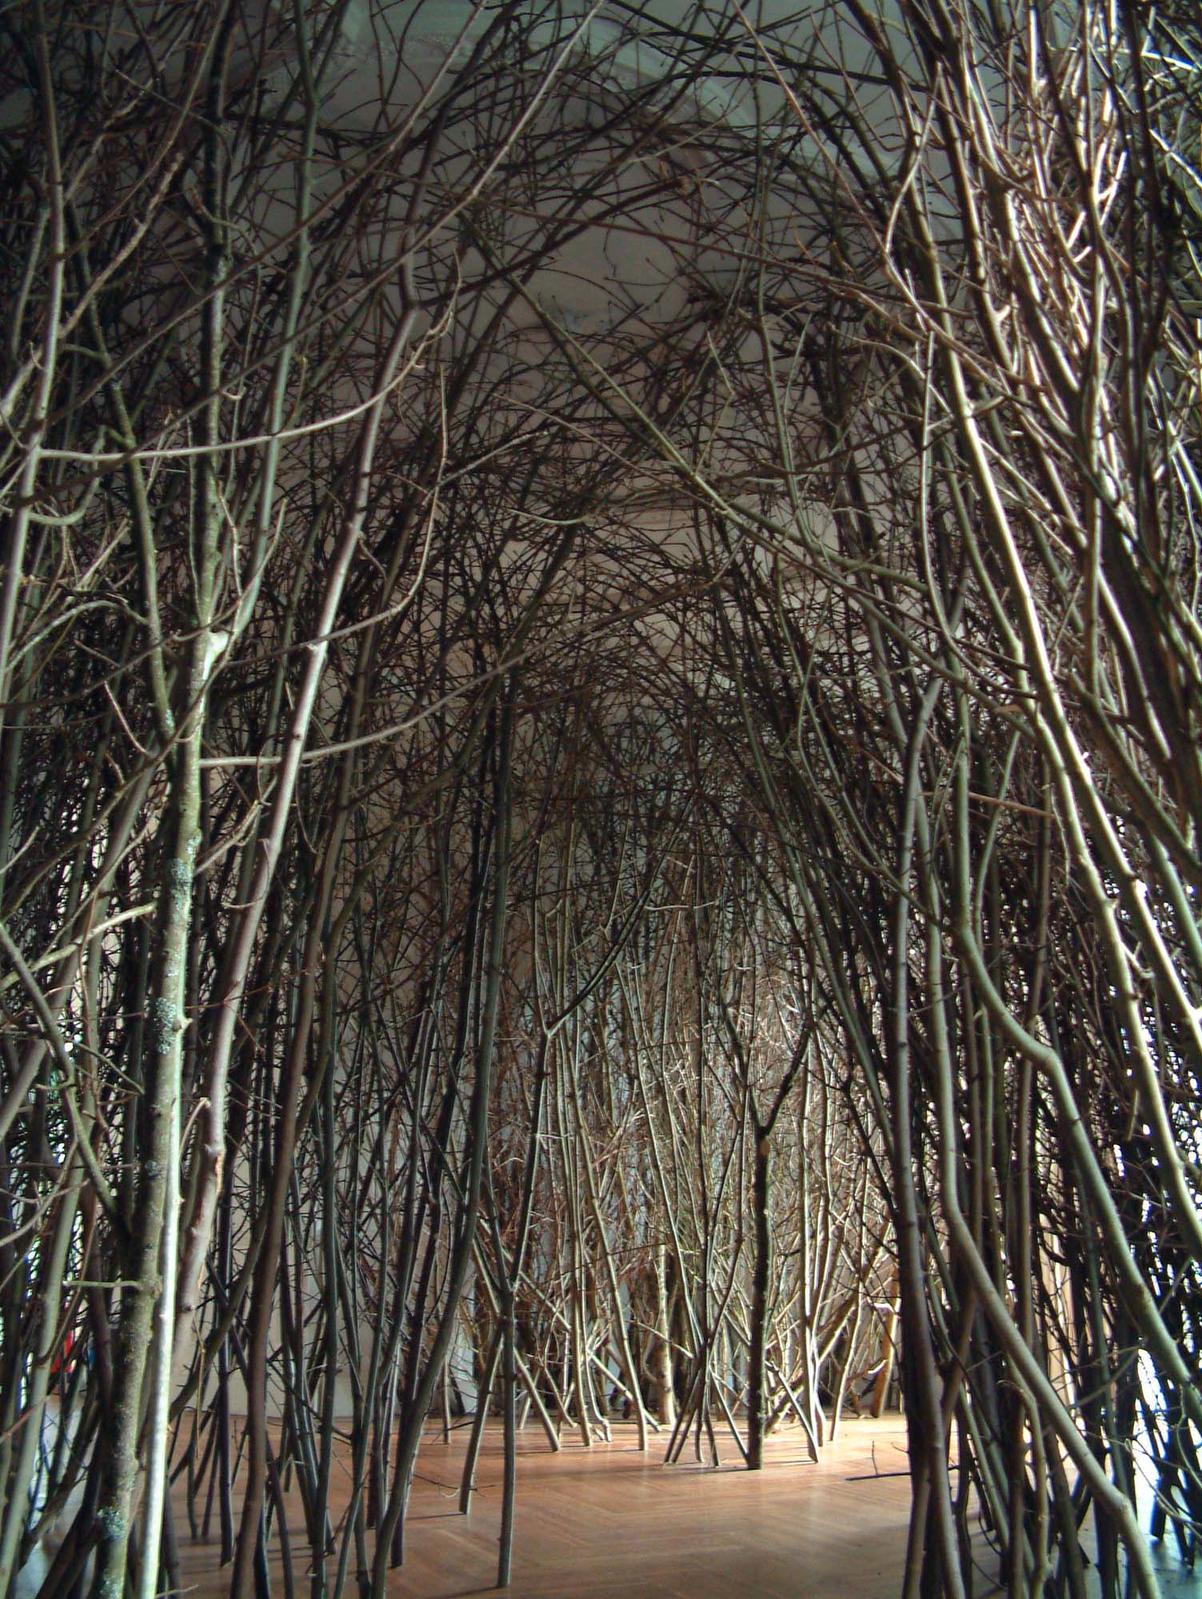 Olafur Eliasson, The forked forest path, 1998. The Towner Art Gallery, Eastbourne, UK, 2004. Photo: Antony Carr